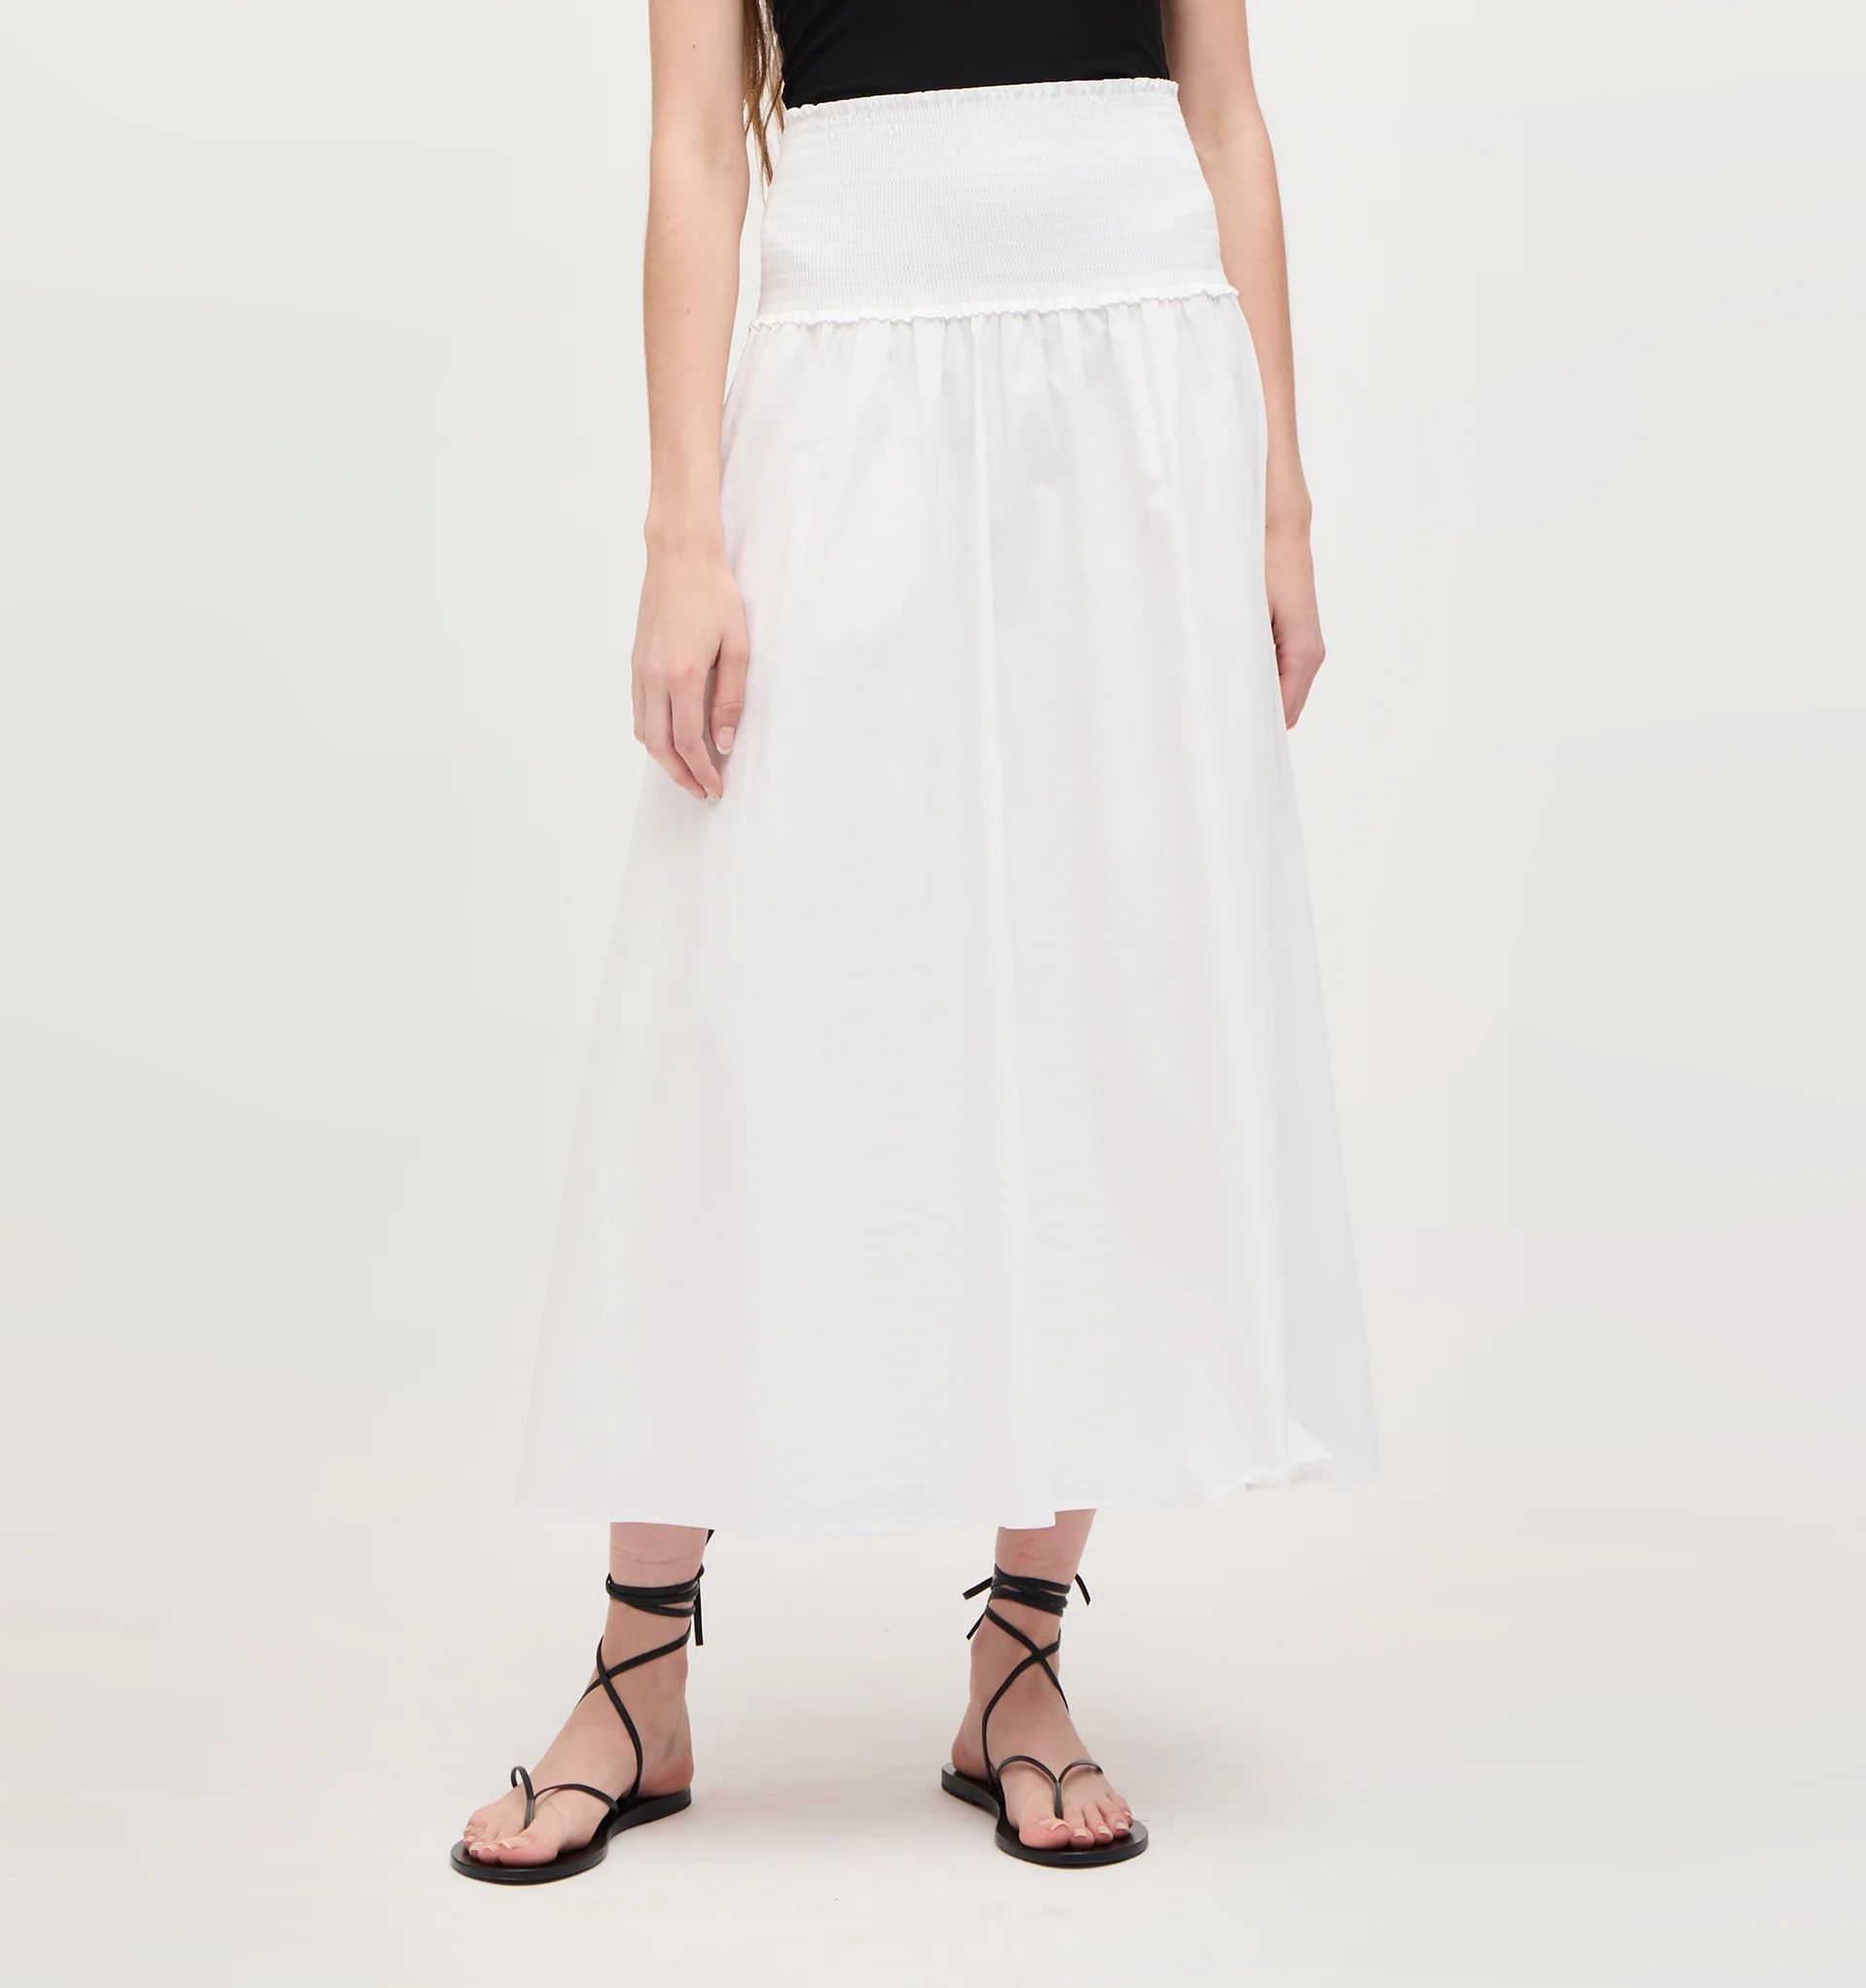 The Delphine Nap Skirt | Hill House Home